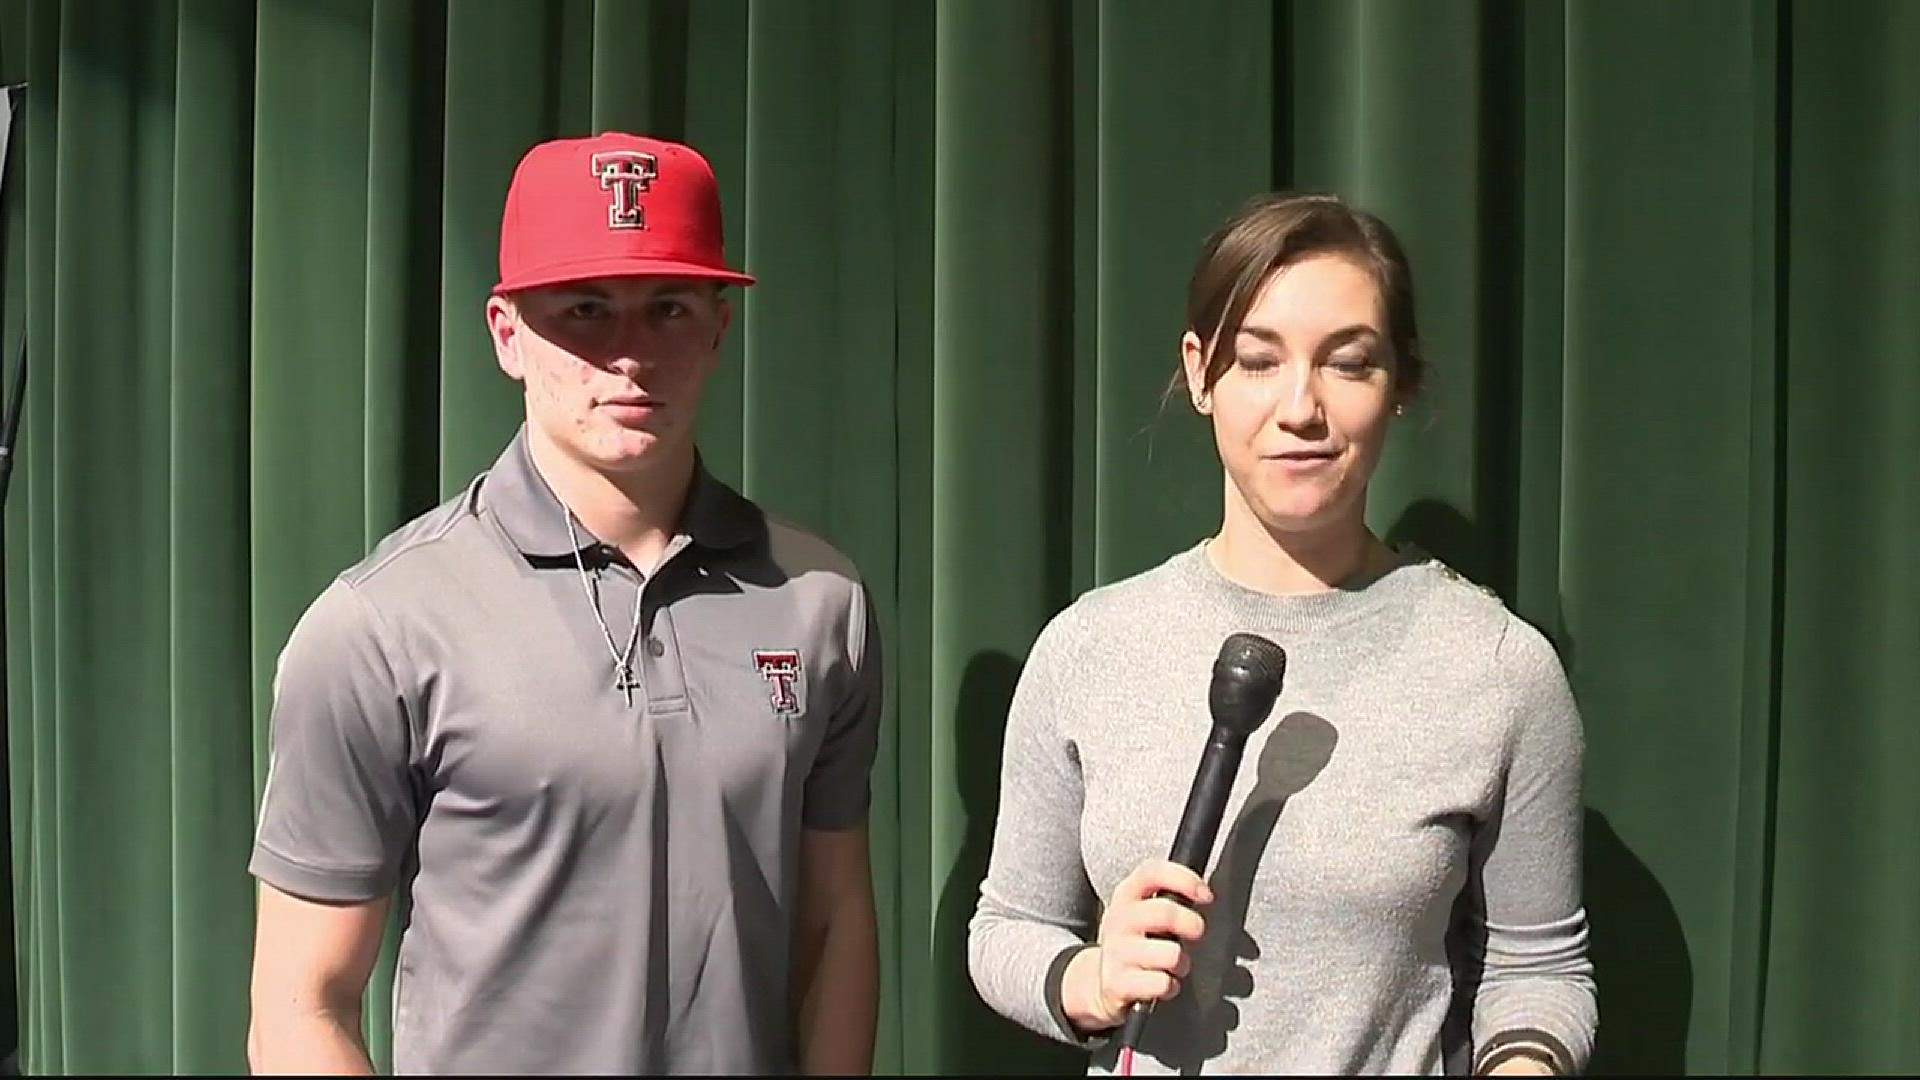 Burnet football star Sterling Galban has signed to play at Texas Tech.  KVUE's Stacy Slayden has the story.